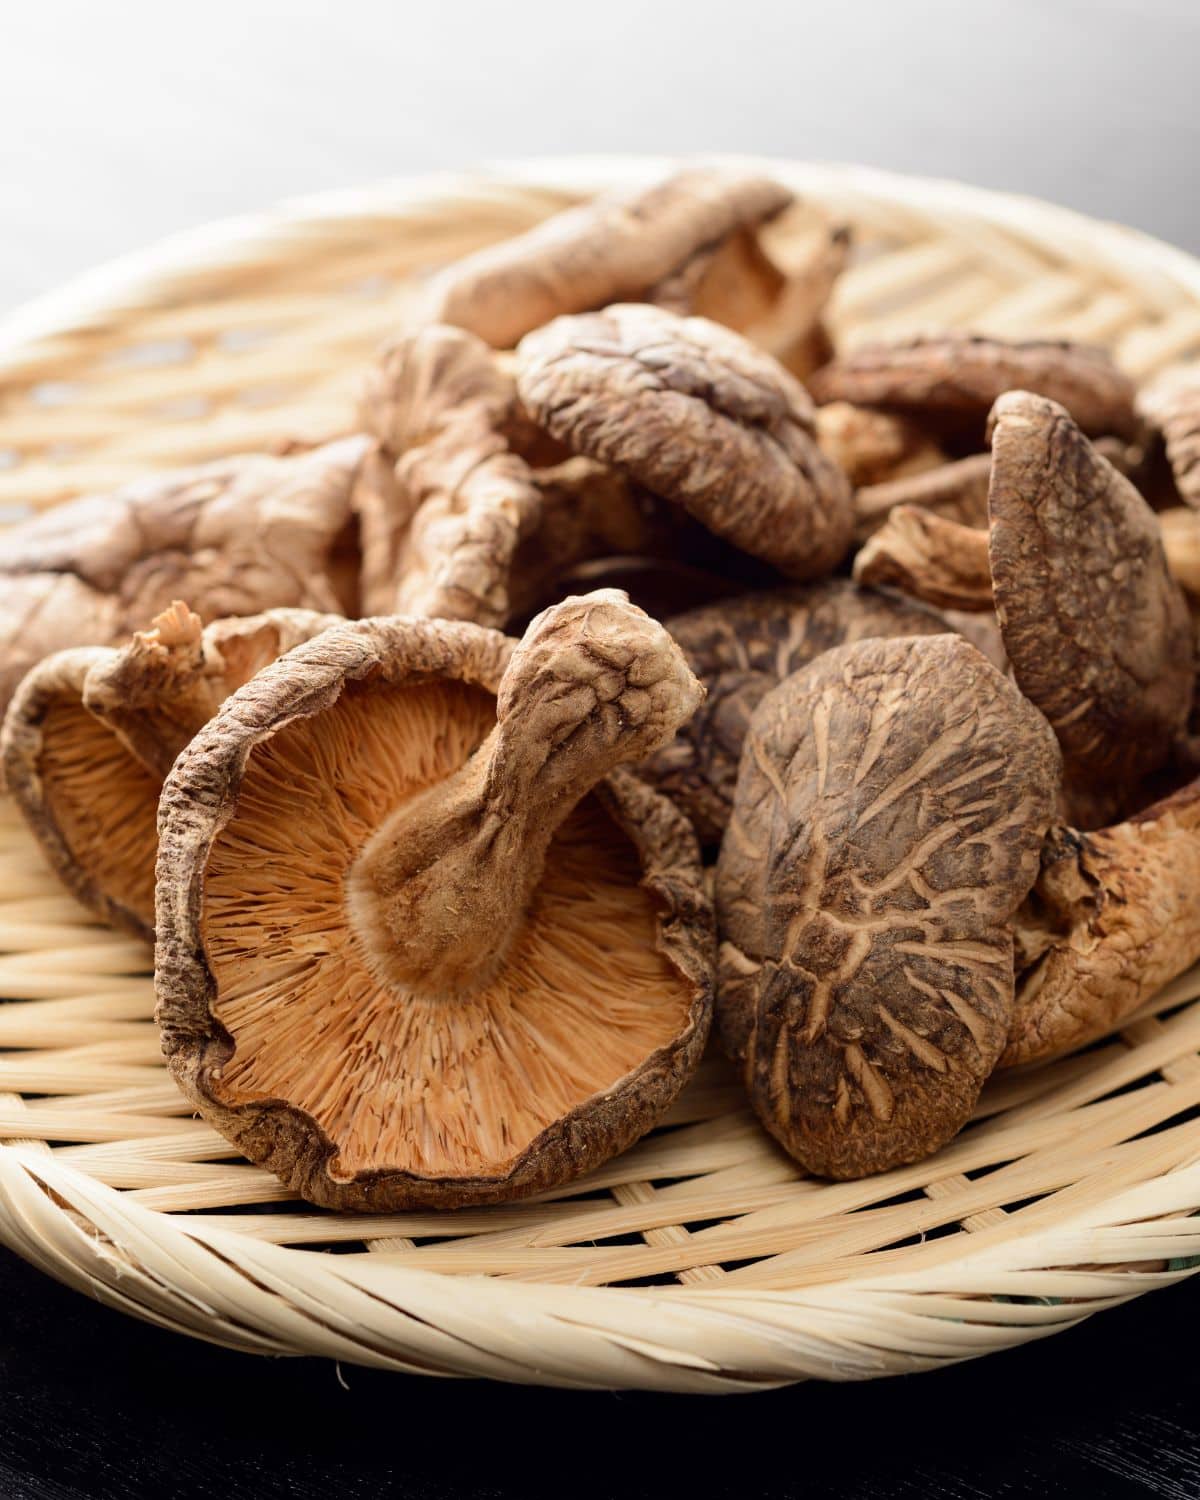 Dried mushrooms in a woven basket.